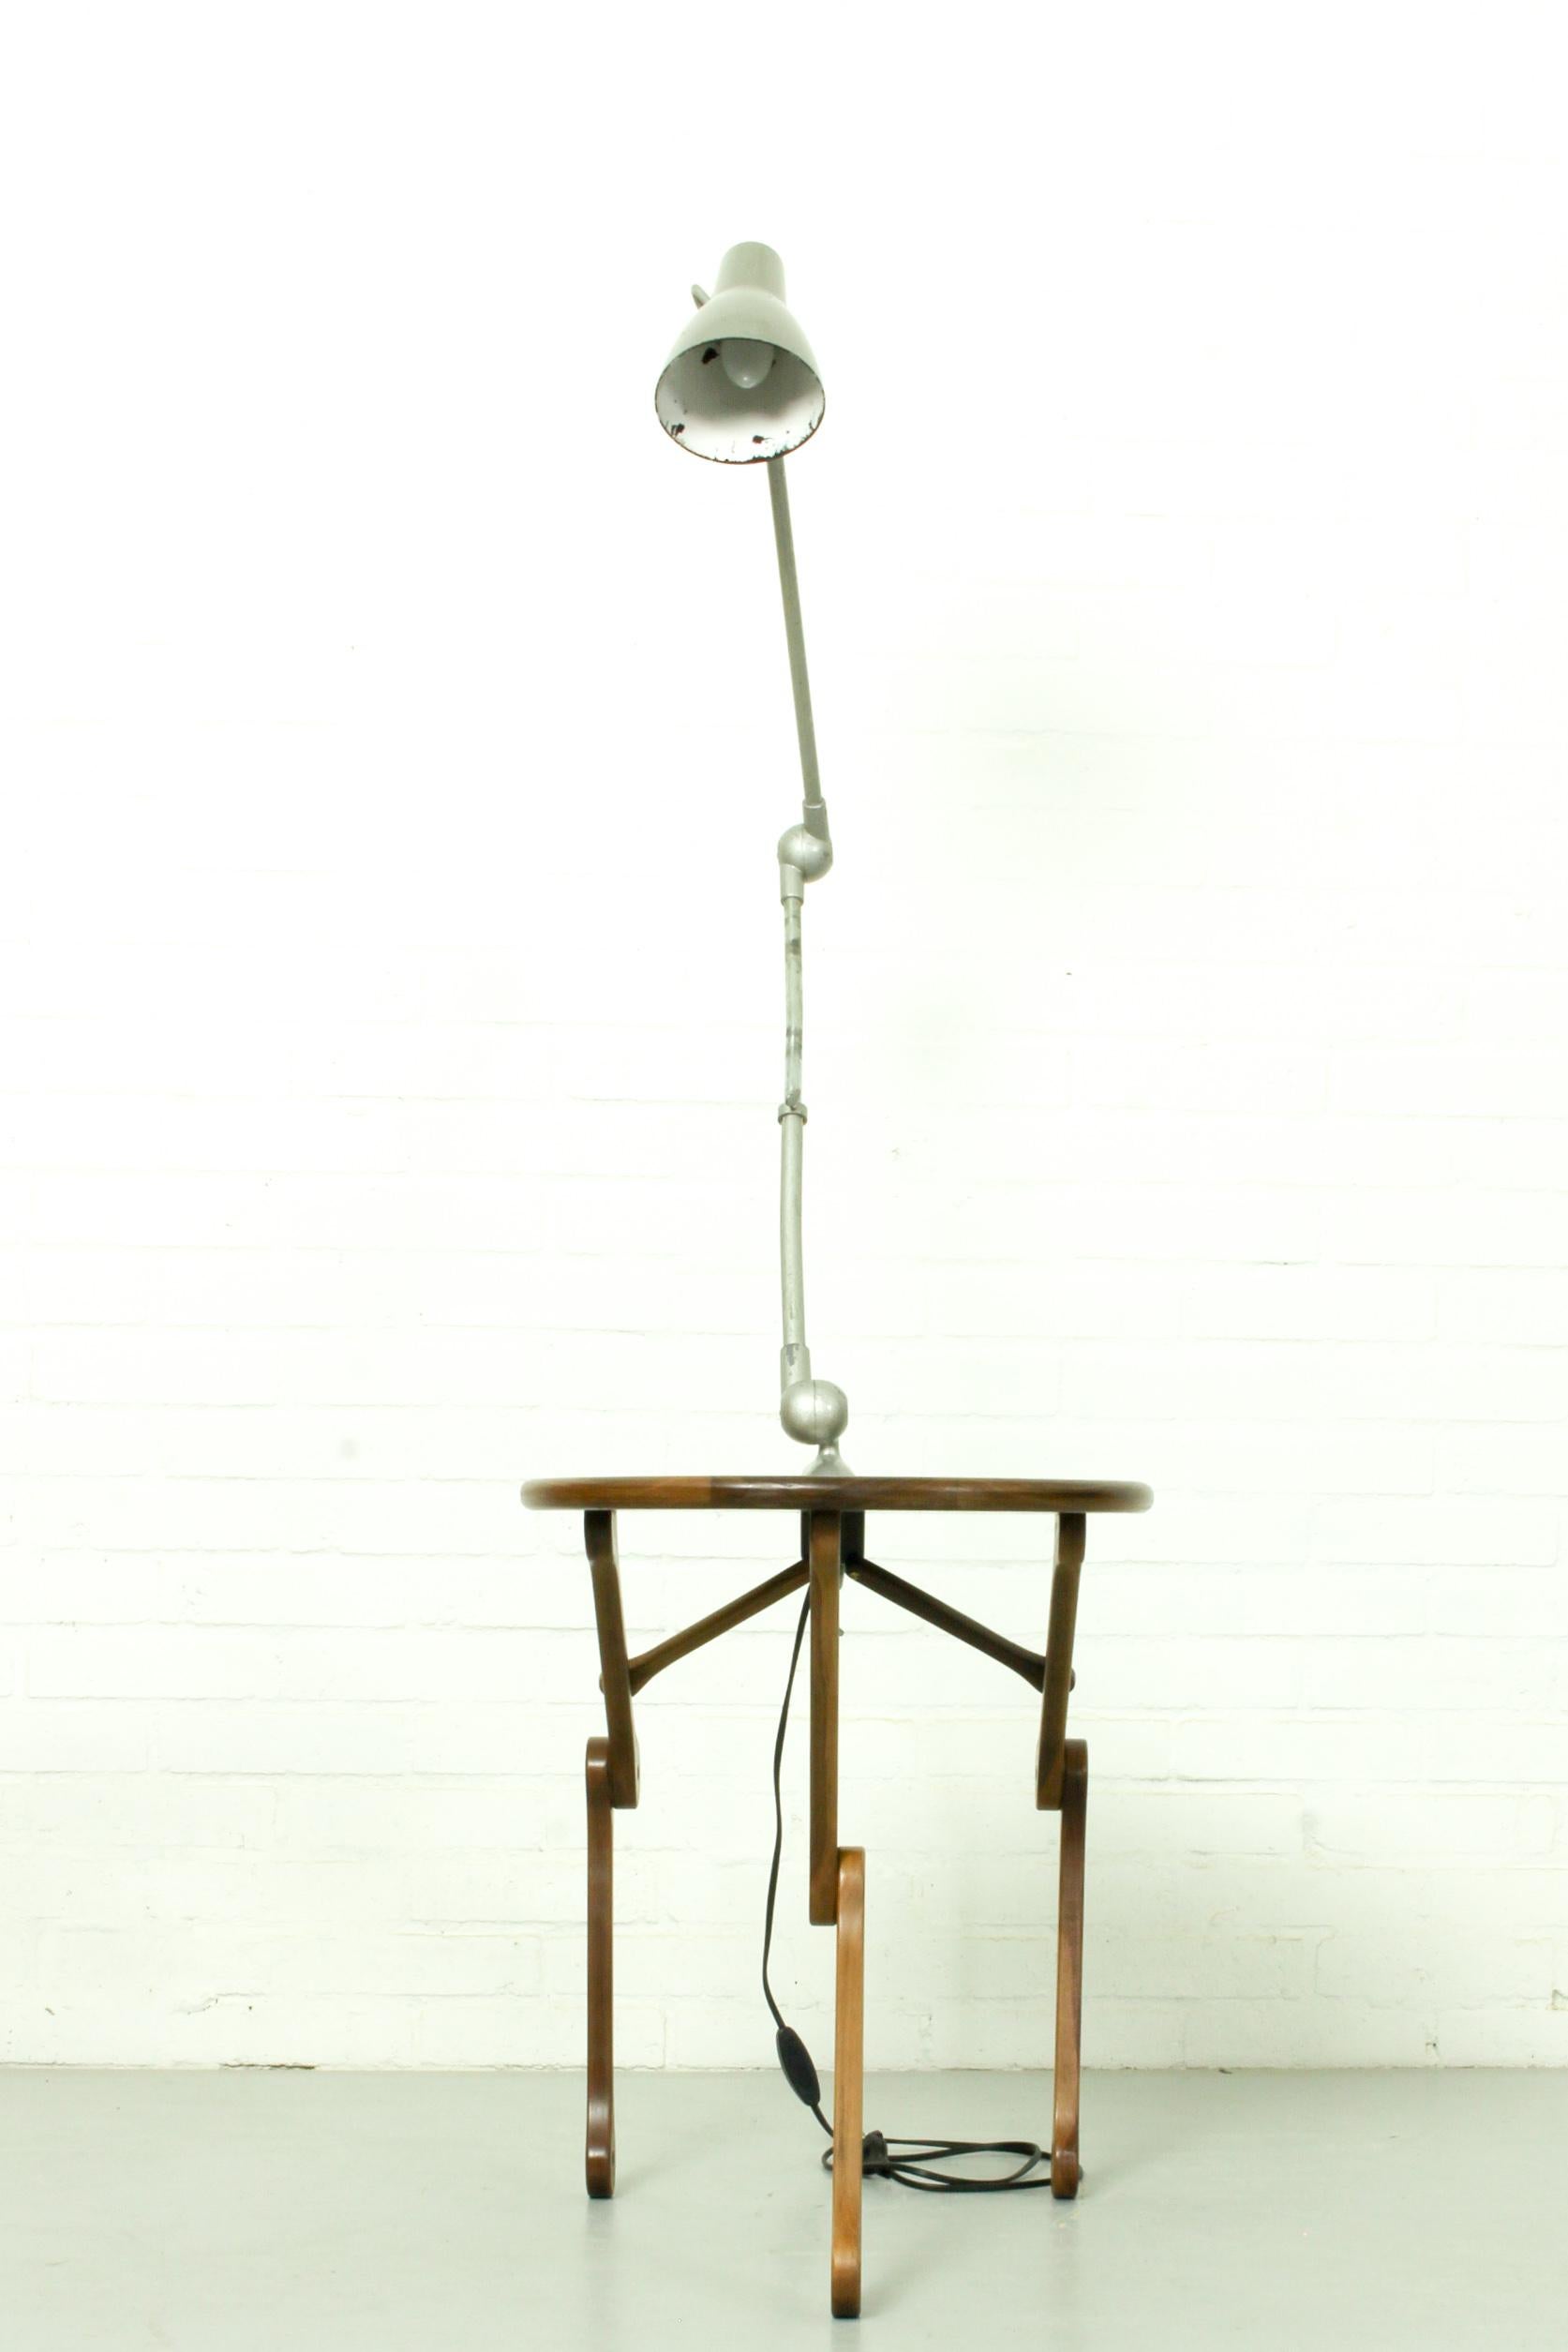 Cool and funky Industrial robotic style table lamp. The lamp has an organically new handmade shaped American nut foot with attached table so it can be used as standing floor lamp. The lamp itself is French and was made by the French company Lumina